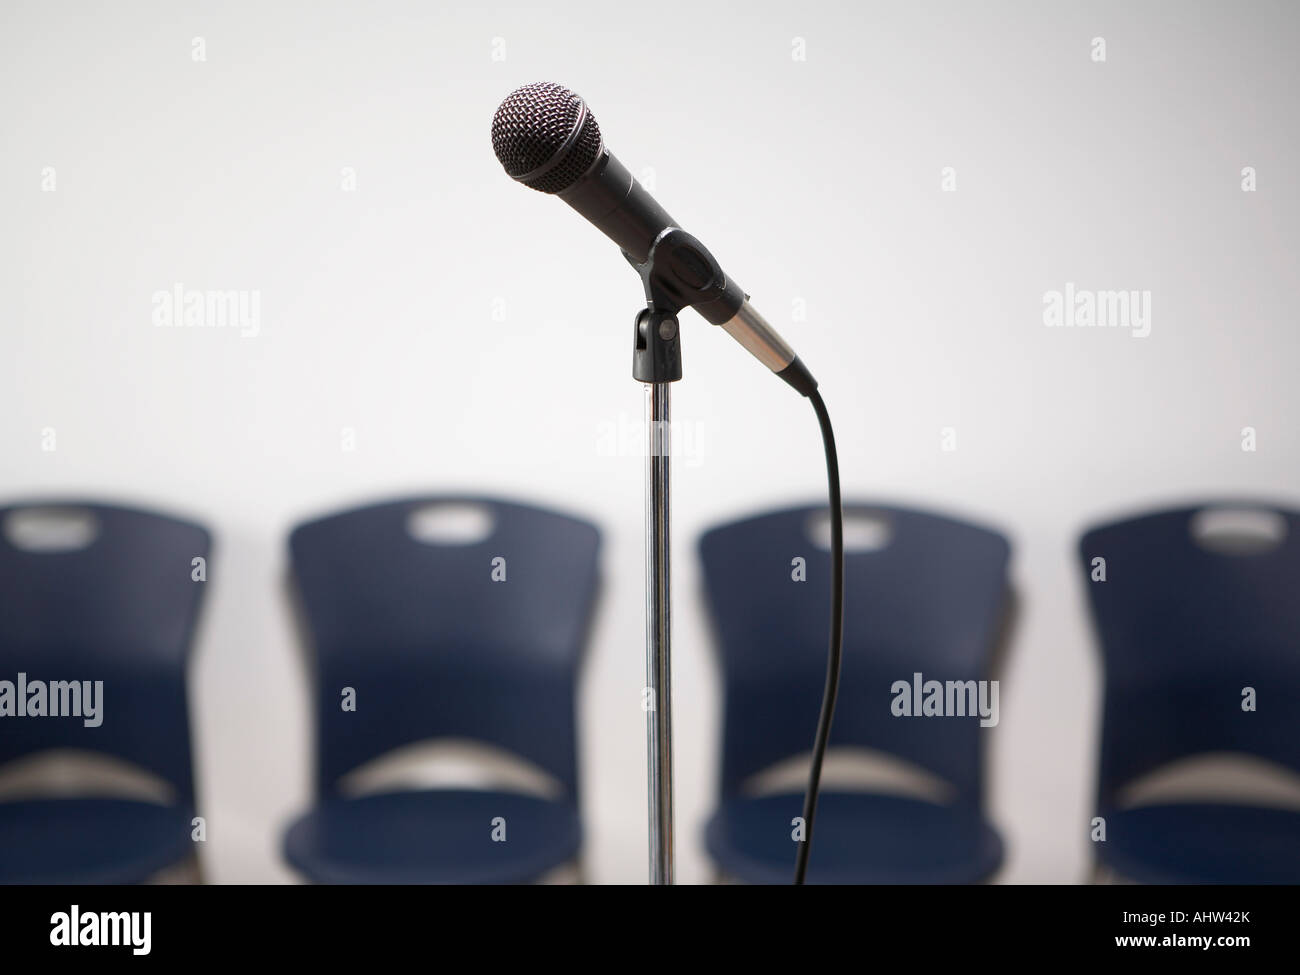 A microphone stand with chairs in the background. Stock Photo